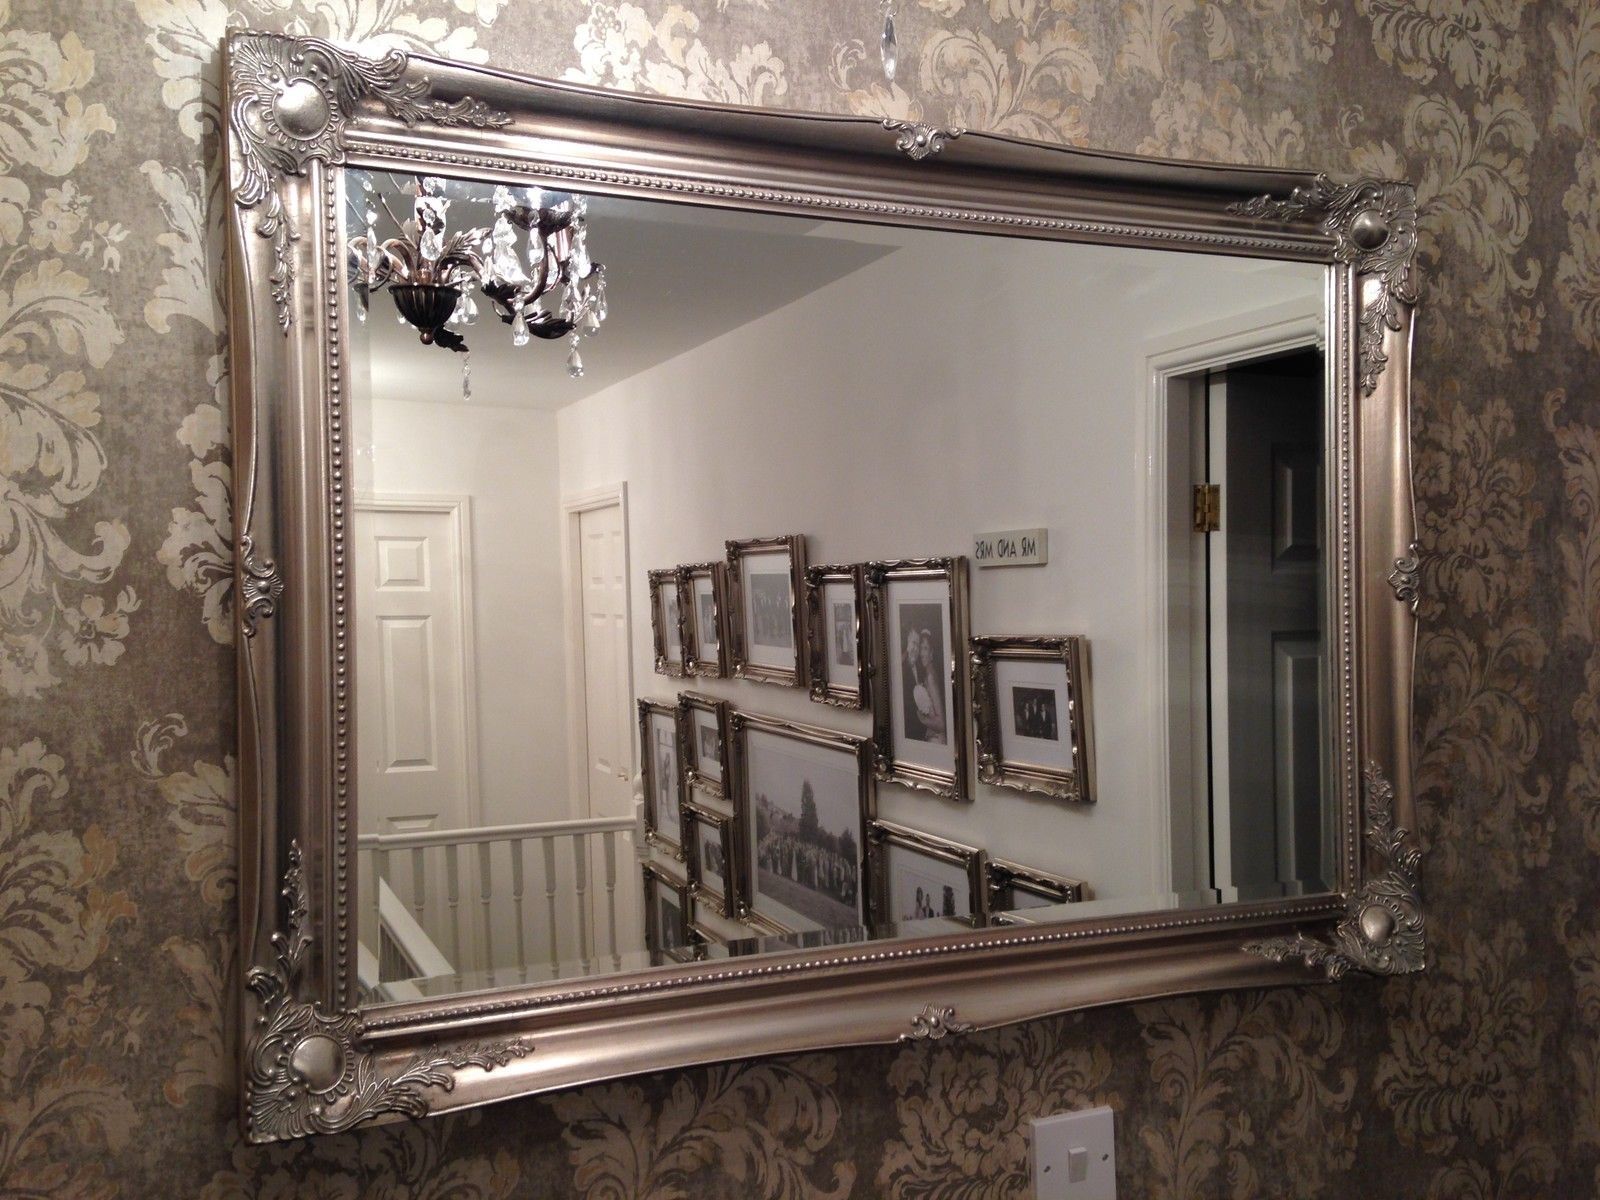 Delightful Ideas Large Decorative Wall Mirrors Tremendous Long Throughout Long Decorative Mirrors (View 12 of 15)